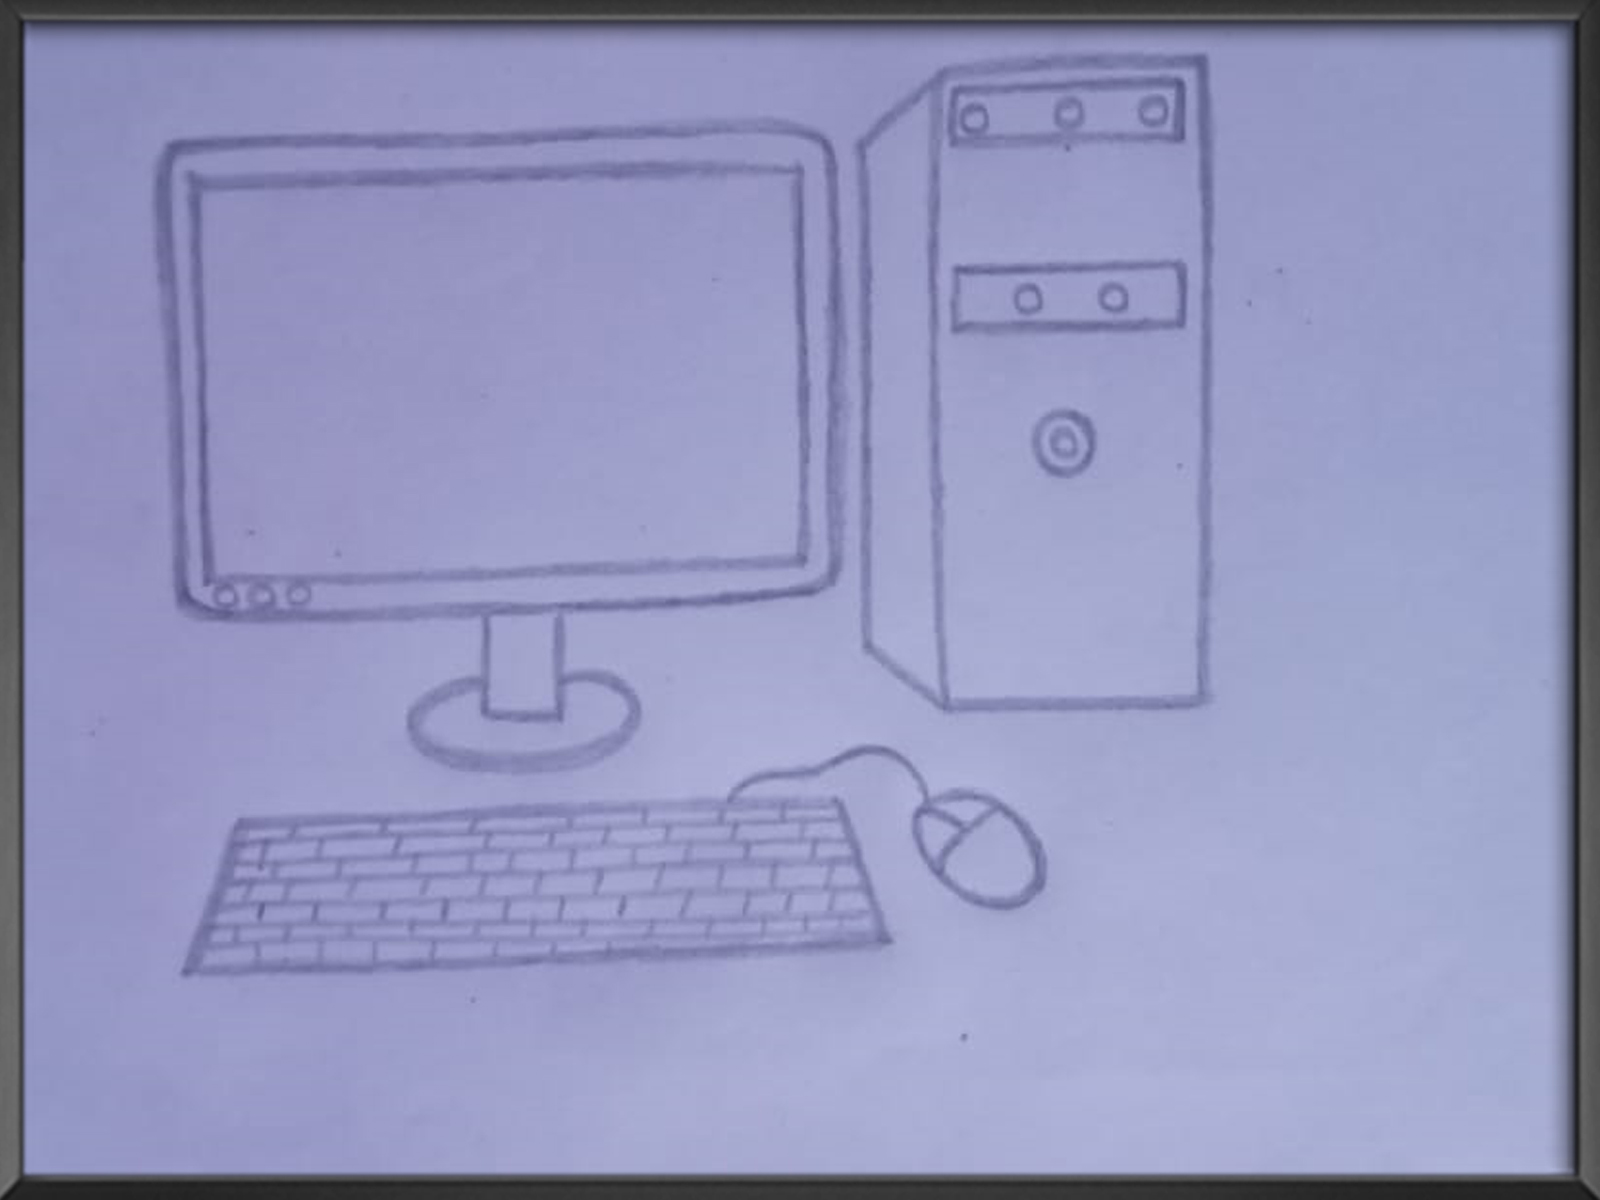 How To Draw A Computer, Step by Step, Drawing Guide, by Dawn - DragoArt